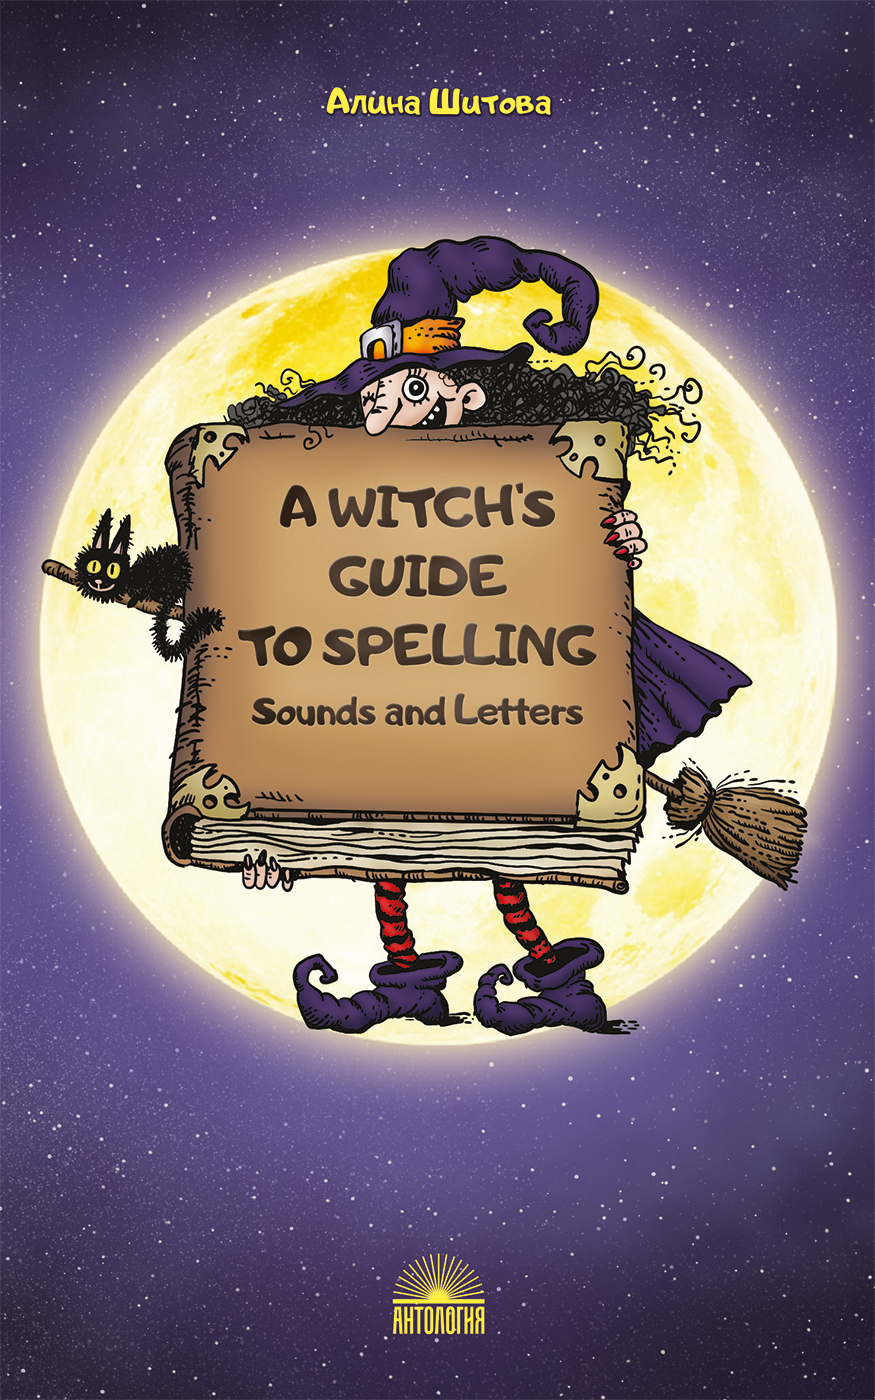 Магия буквы (A Witch’s Guide to Spelling: Sounds and Letters). Учебное пособие